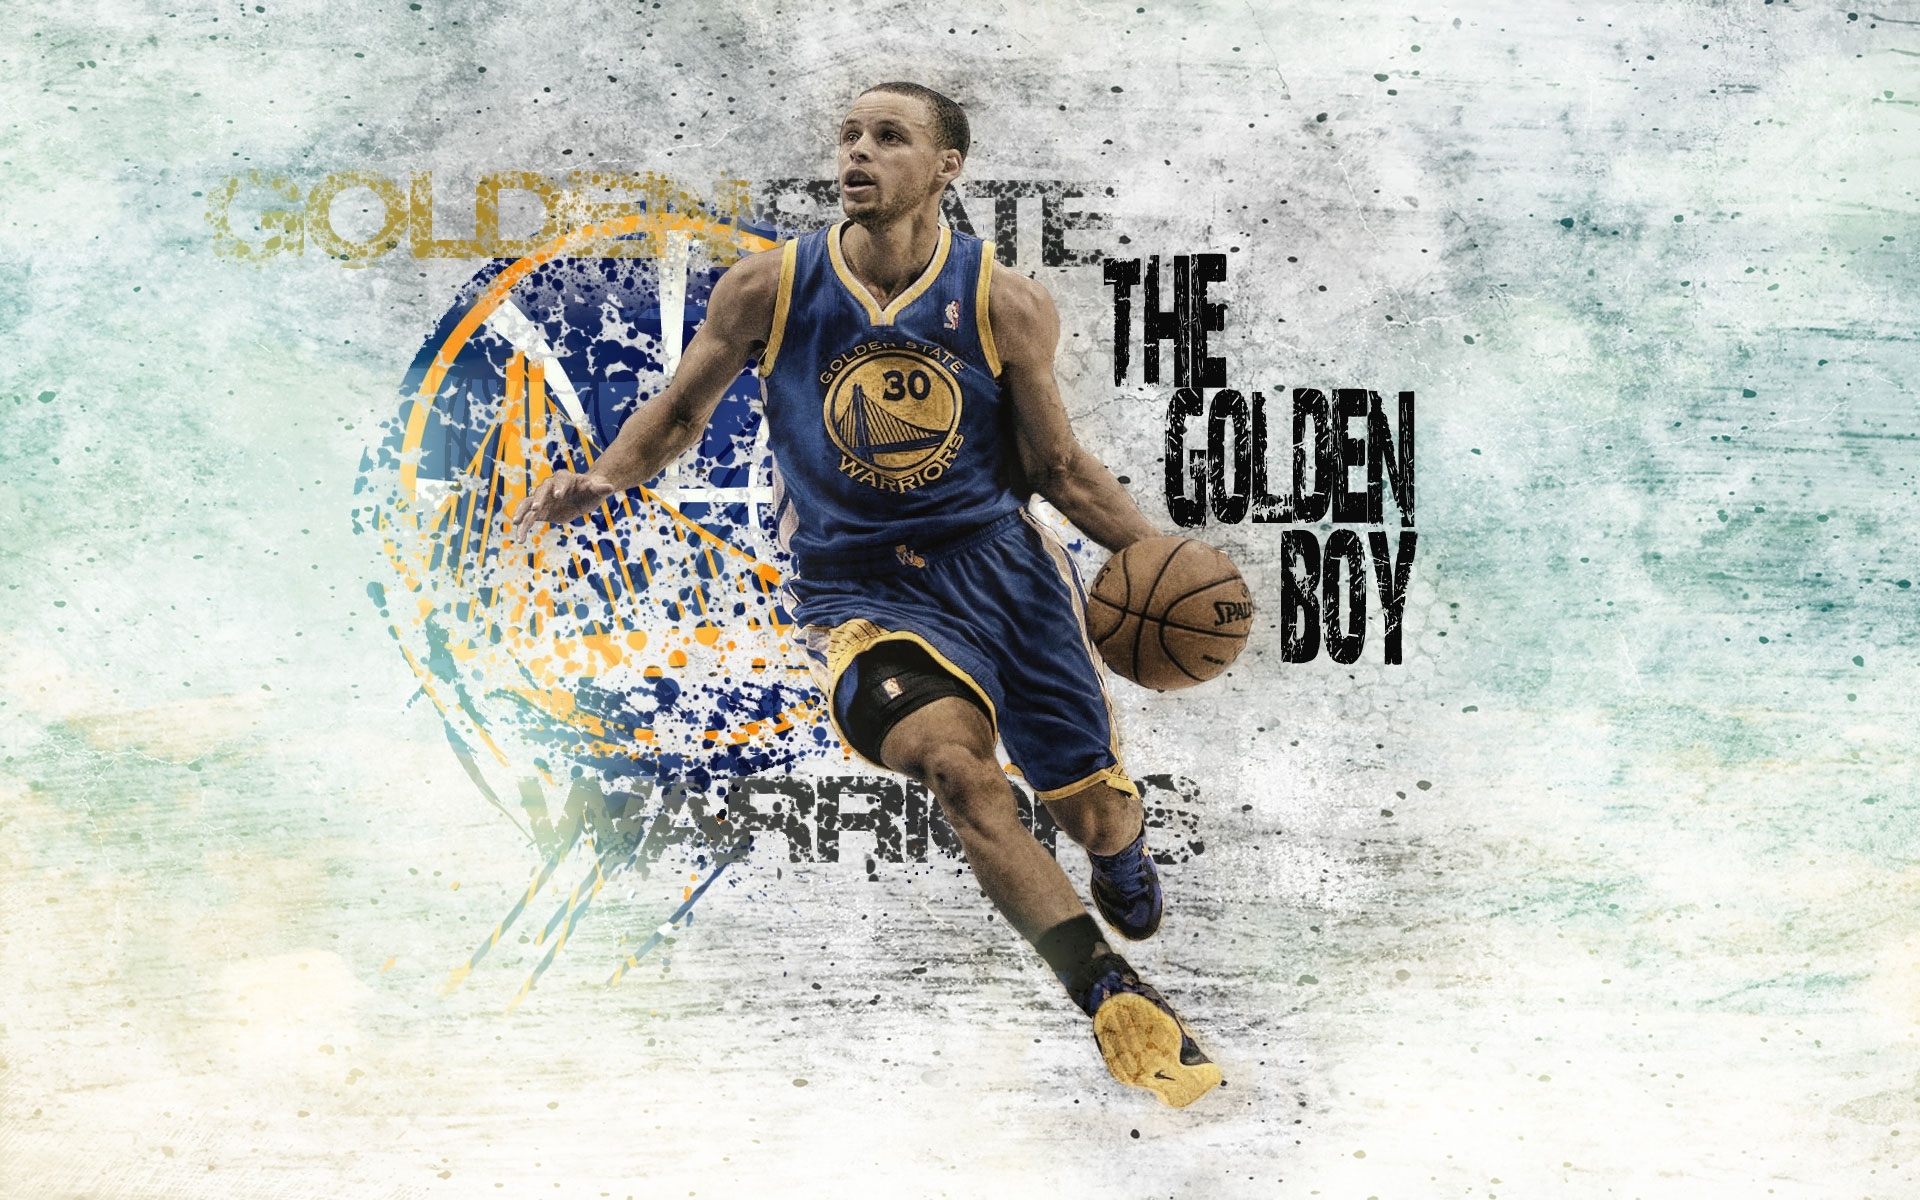 10 Best Stephen Curry Hd Wallpaper FULL HD 1920×1080 For PC Background